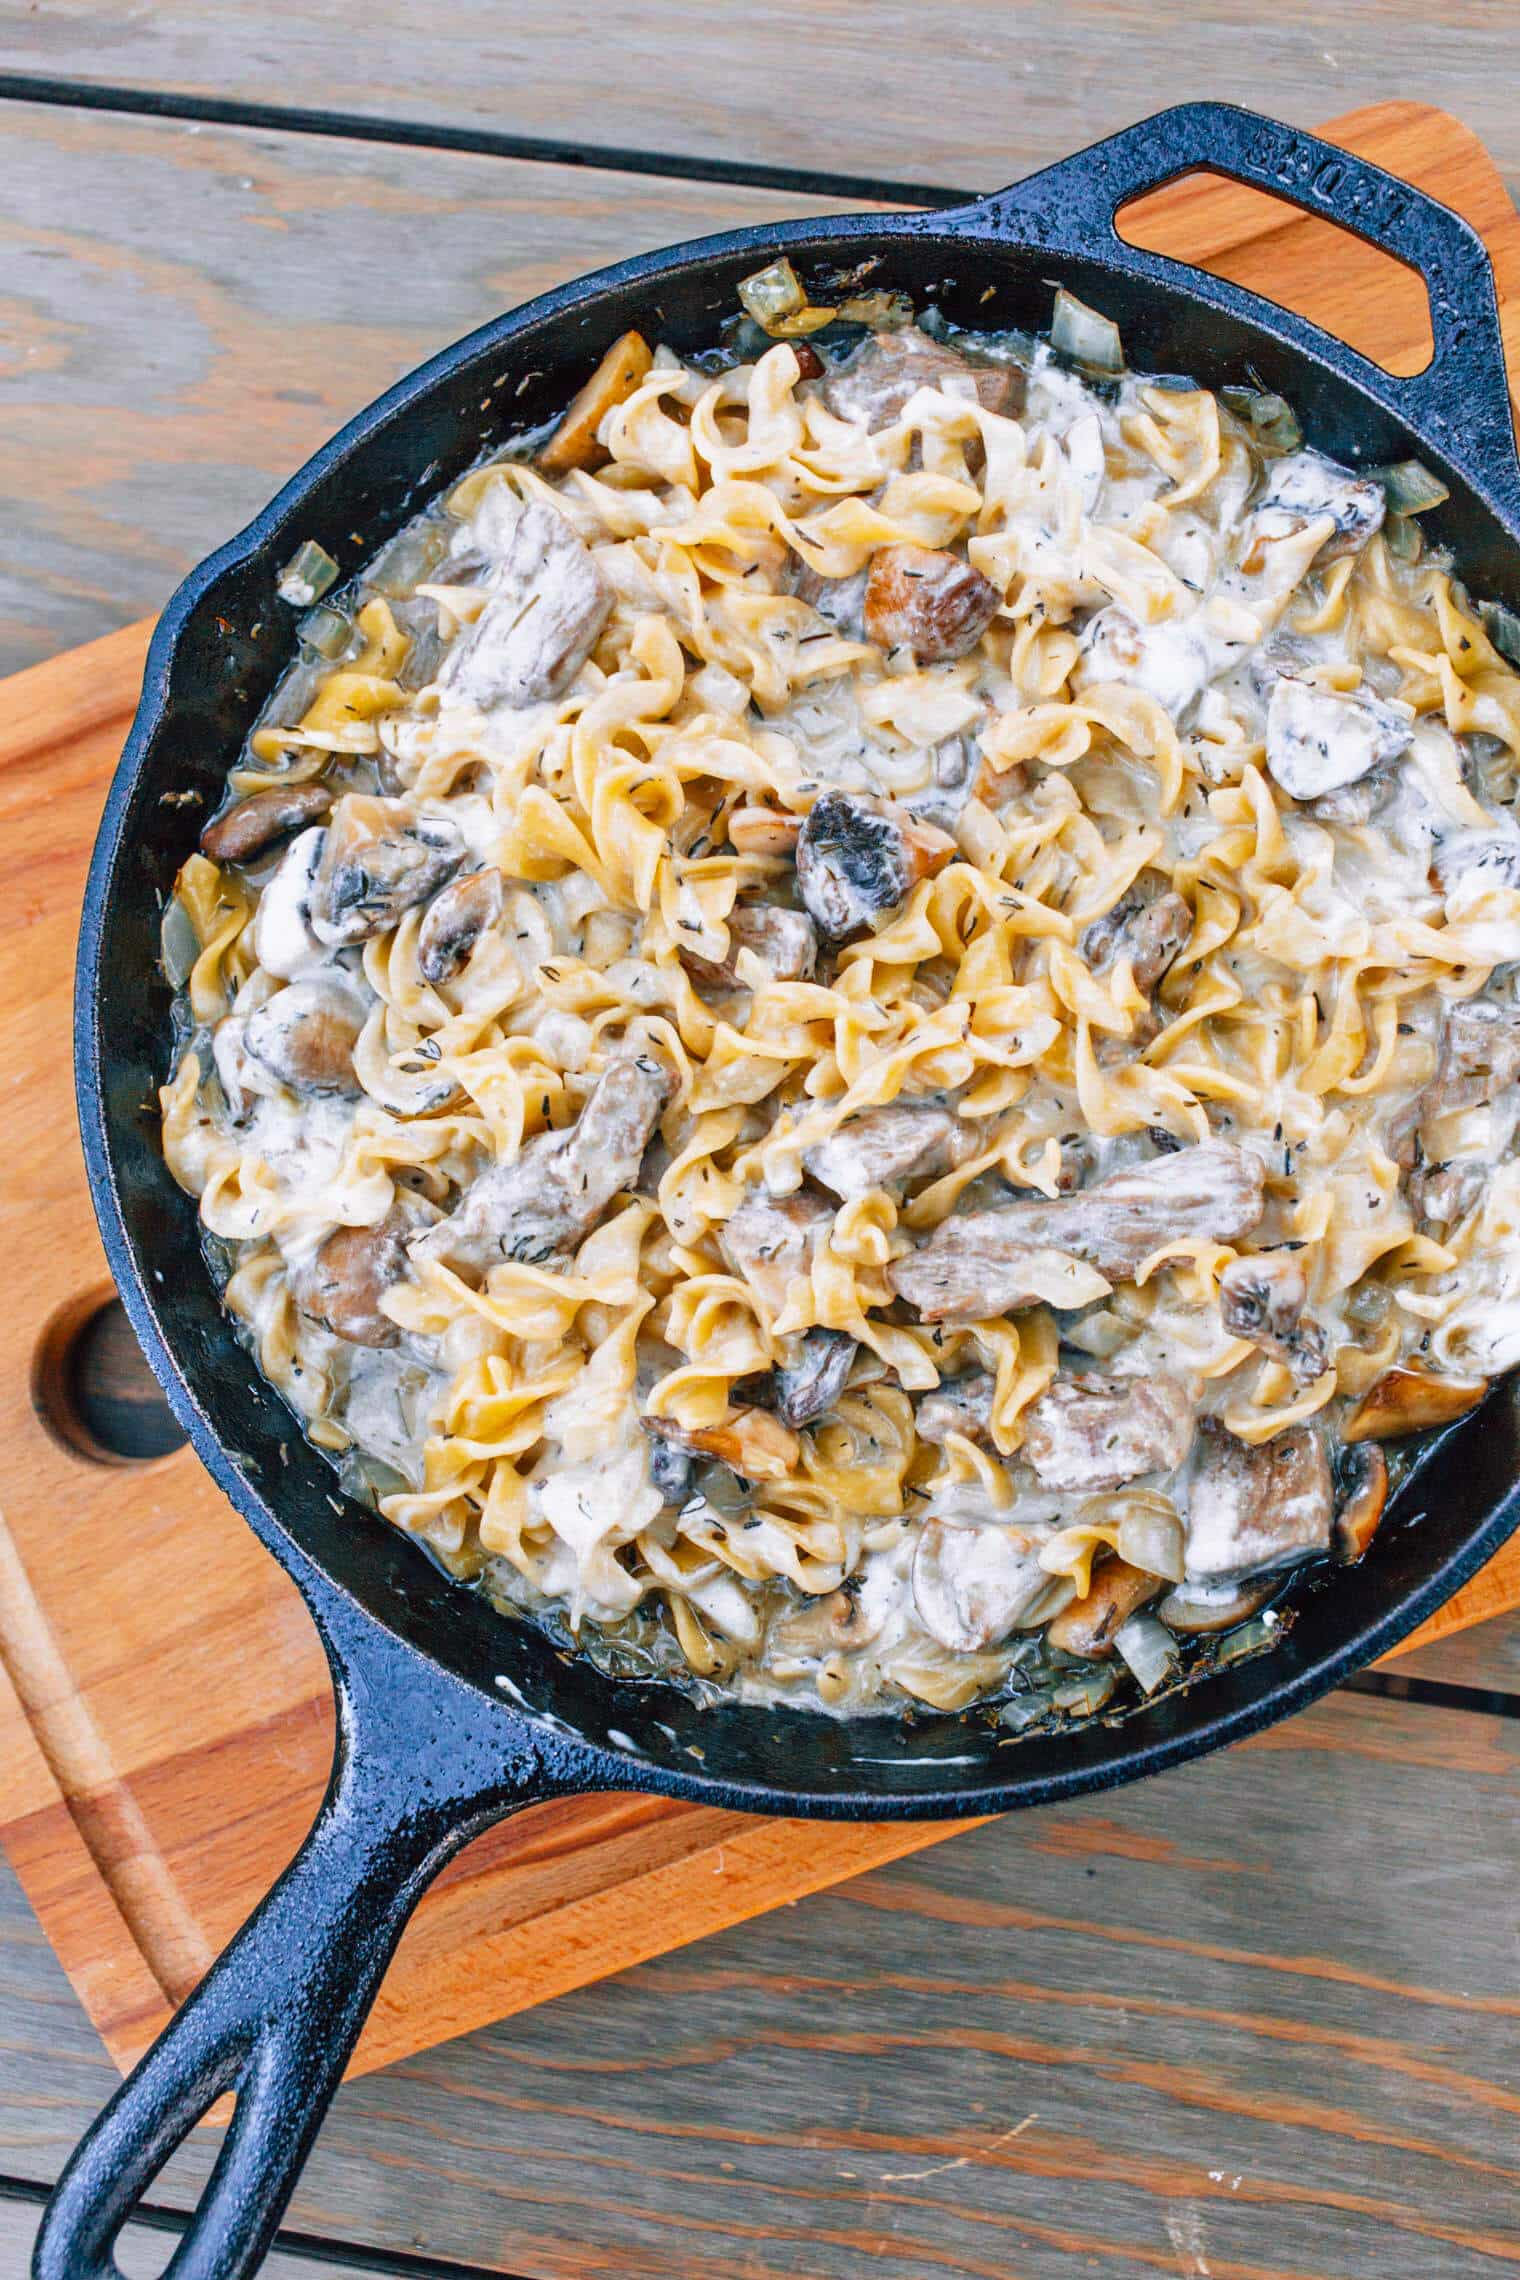 A cast-iron skillet filled with beef stroganoff resting on a wooden cutting board